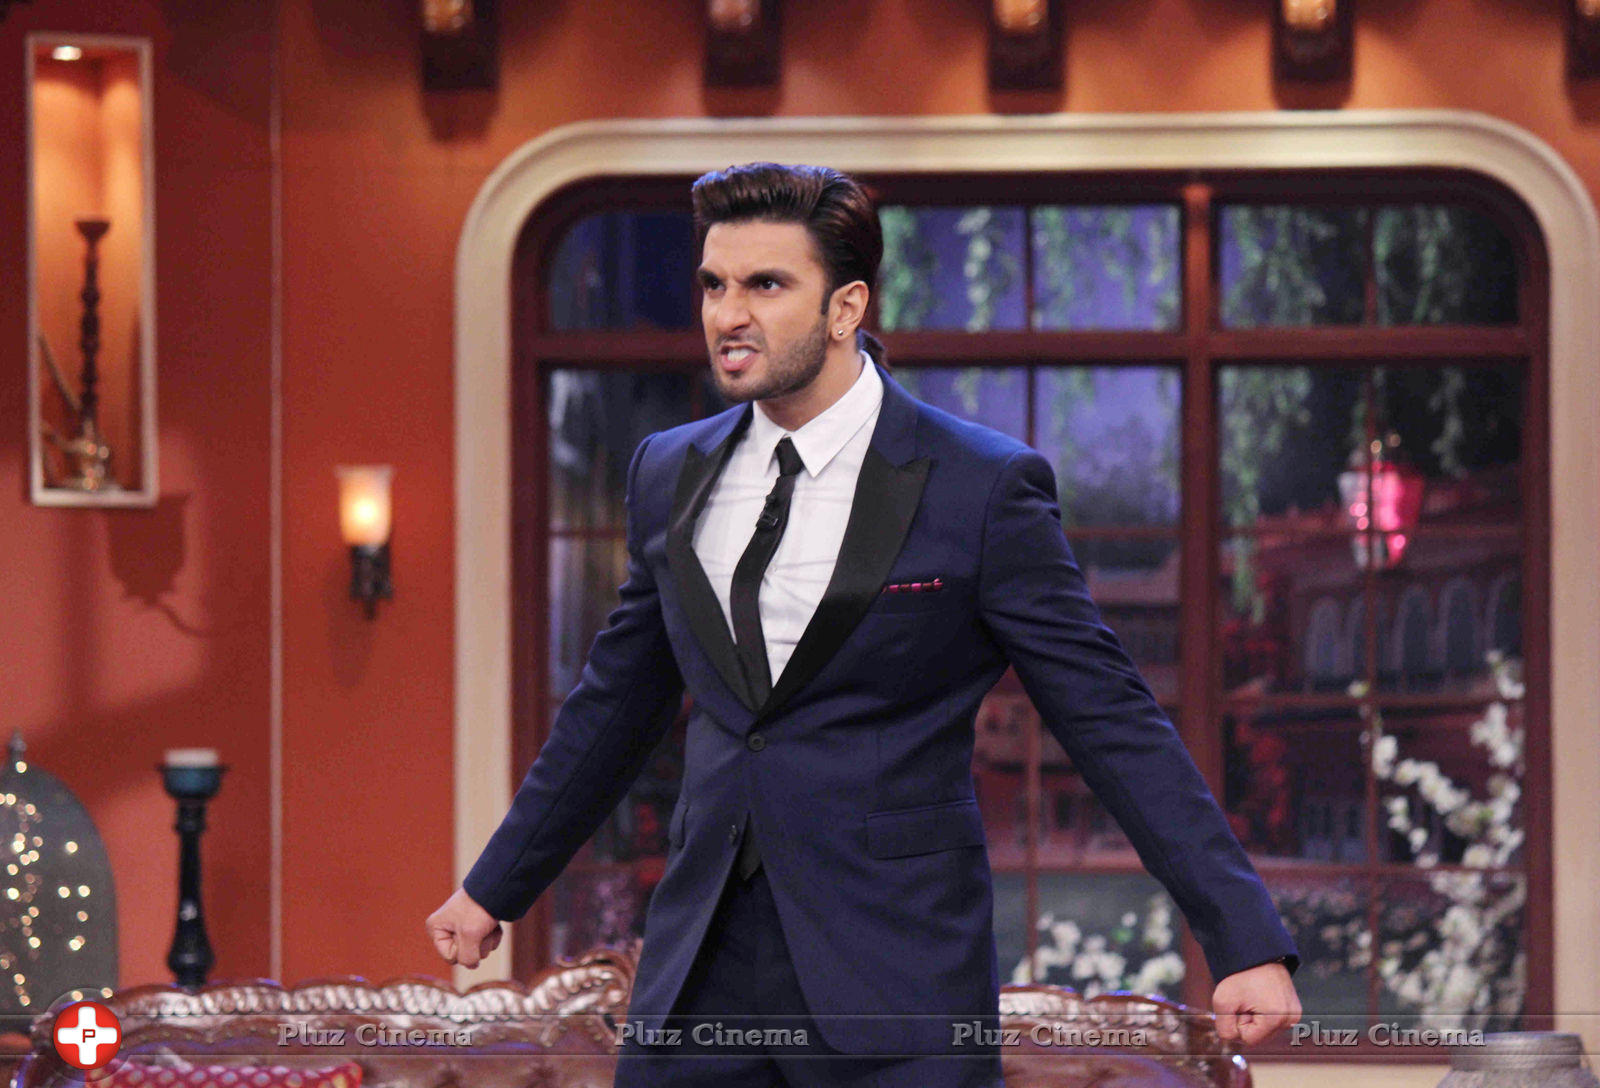 Ranveer Singh - Gunday film Promotion on Comedy Nights with Kapil Photos | Picture 708657